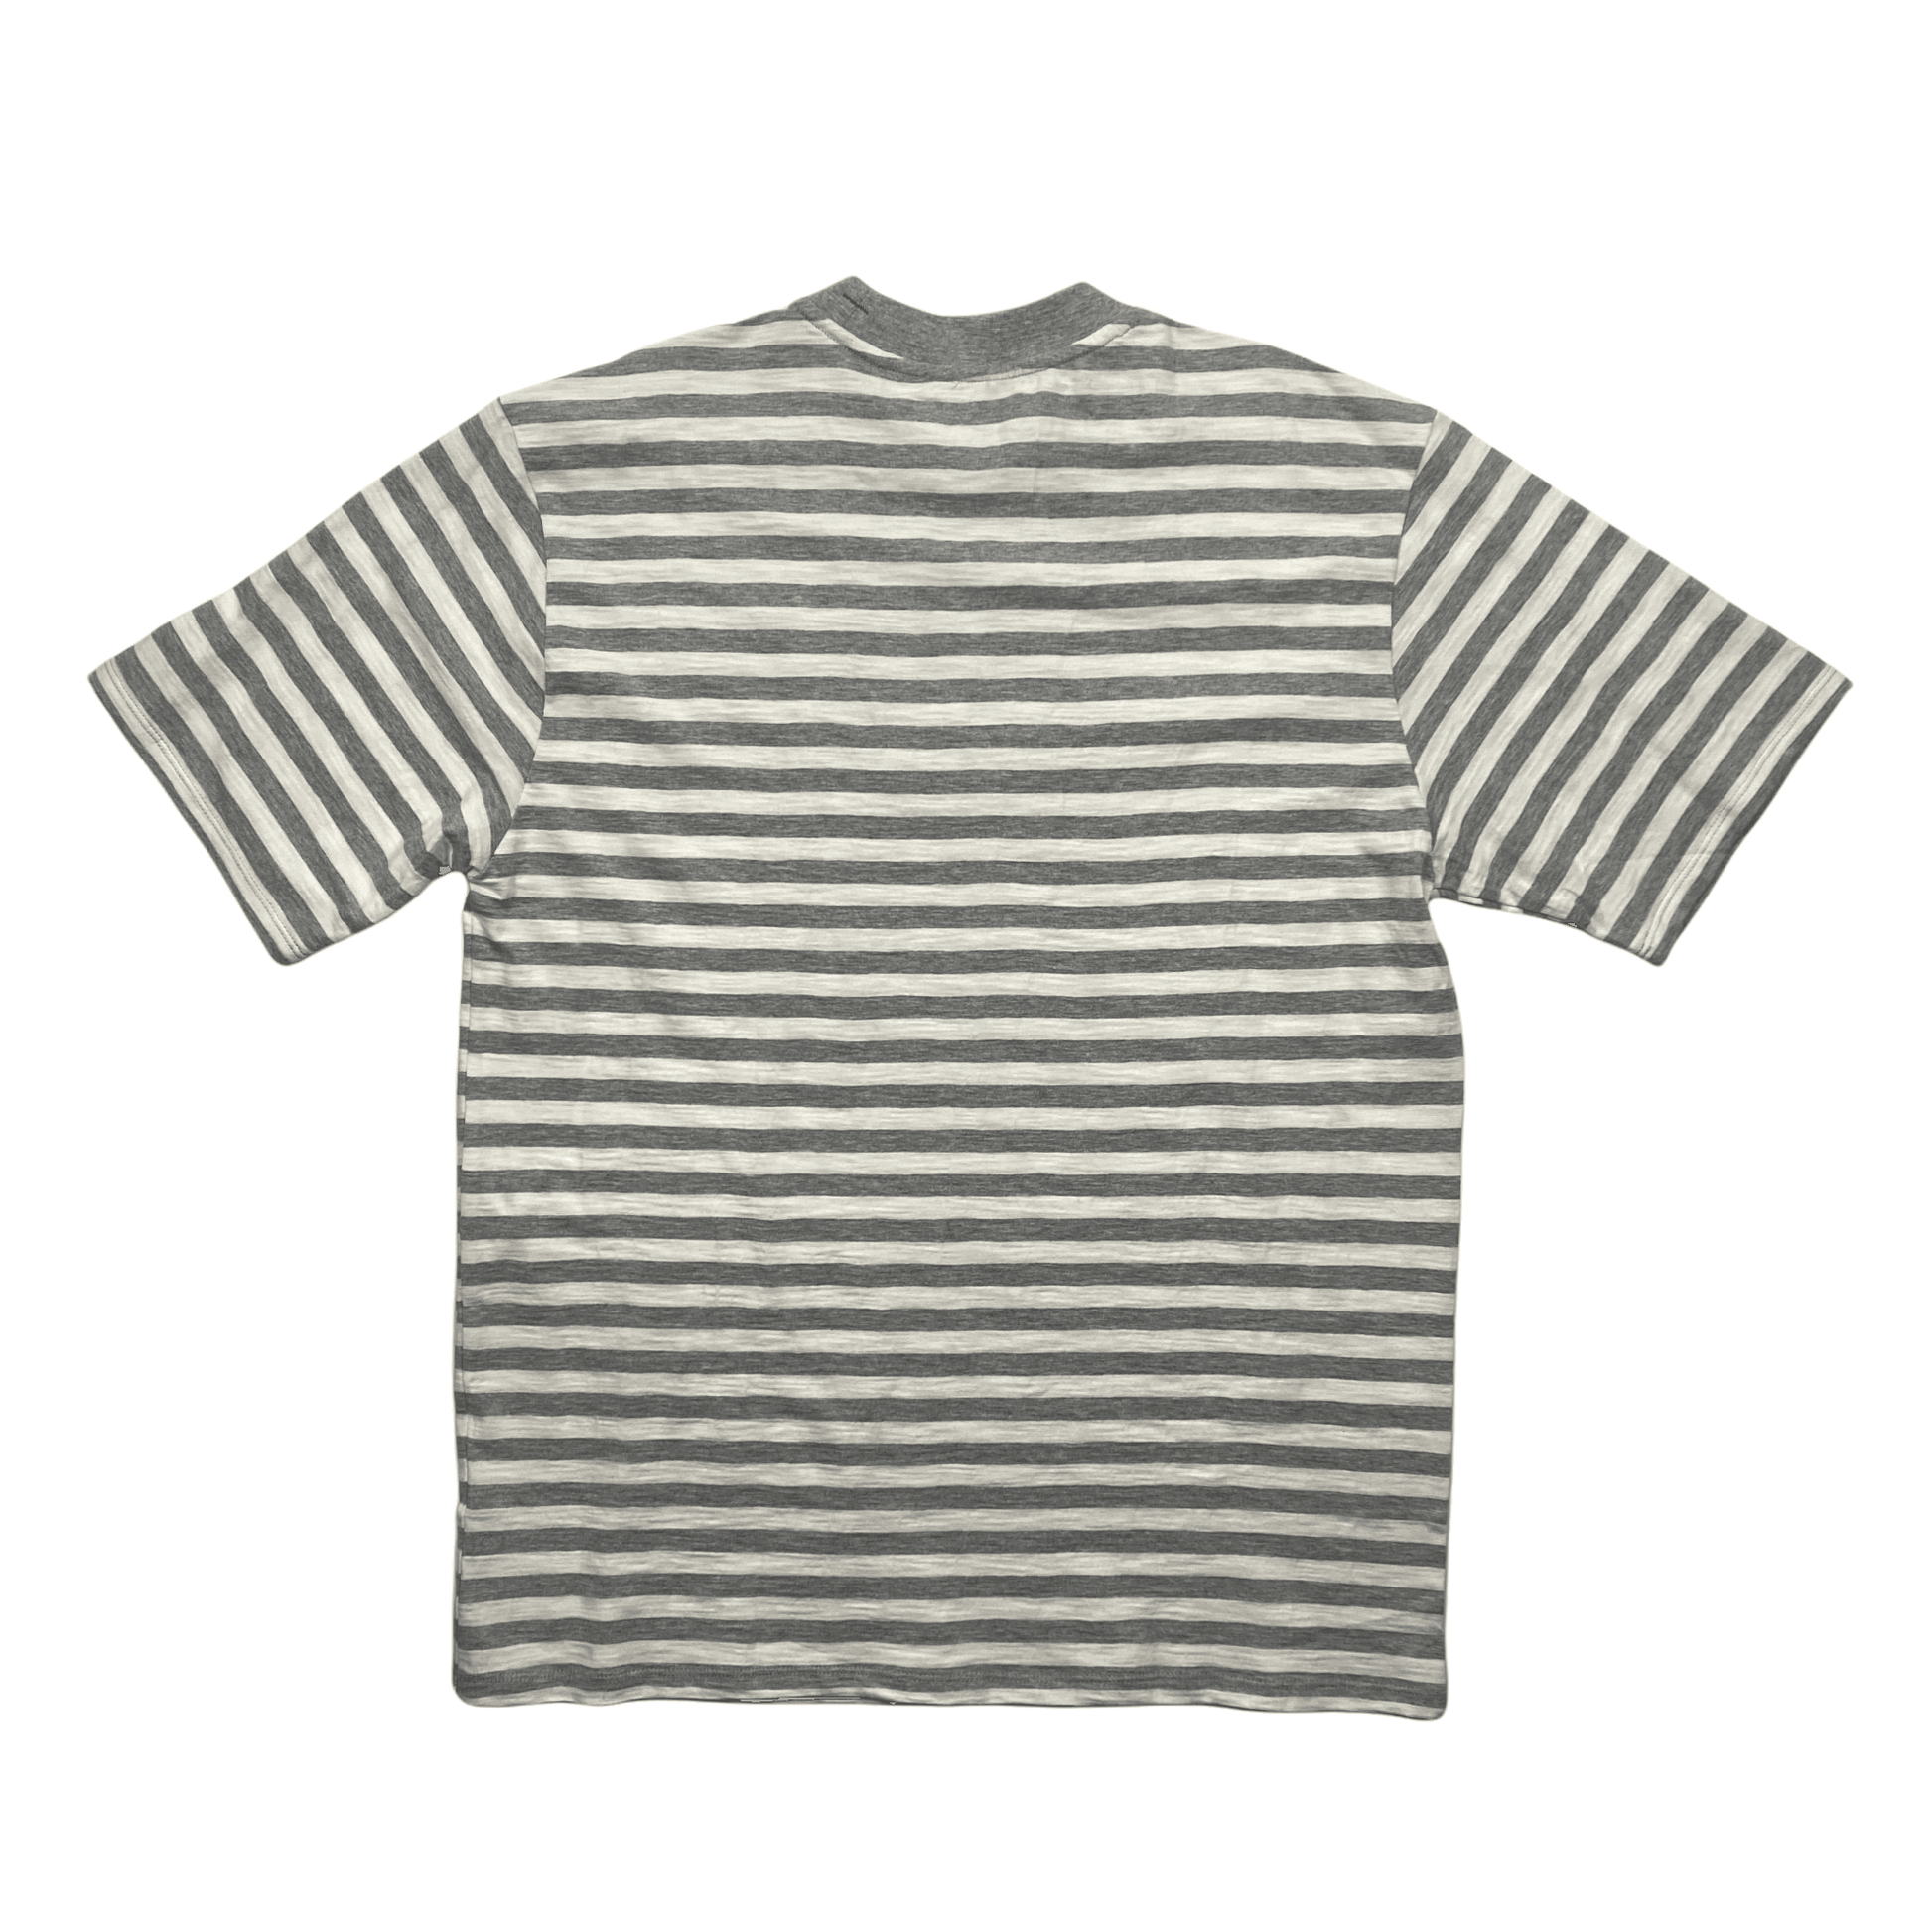 Grey + White Guess Jeans x ASAP Rocky Striped Tee - Extra Large - The Streetwear Studio